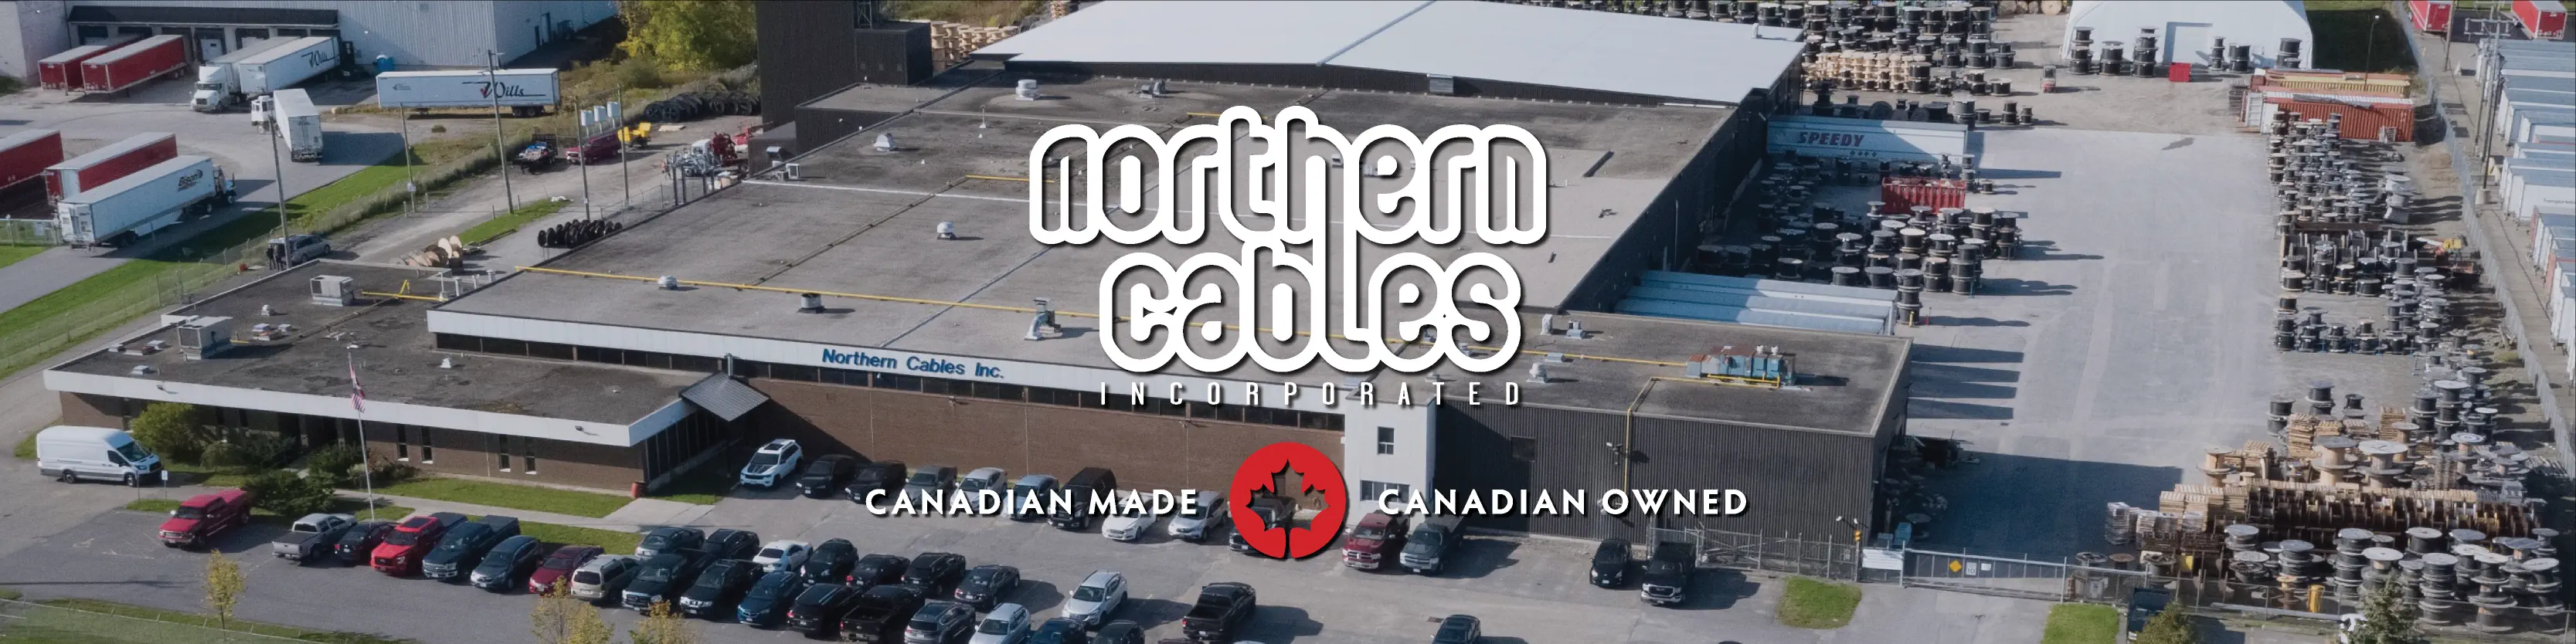 Featured Suppliers Banner Image - Northern Cables